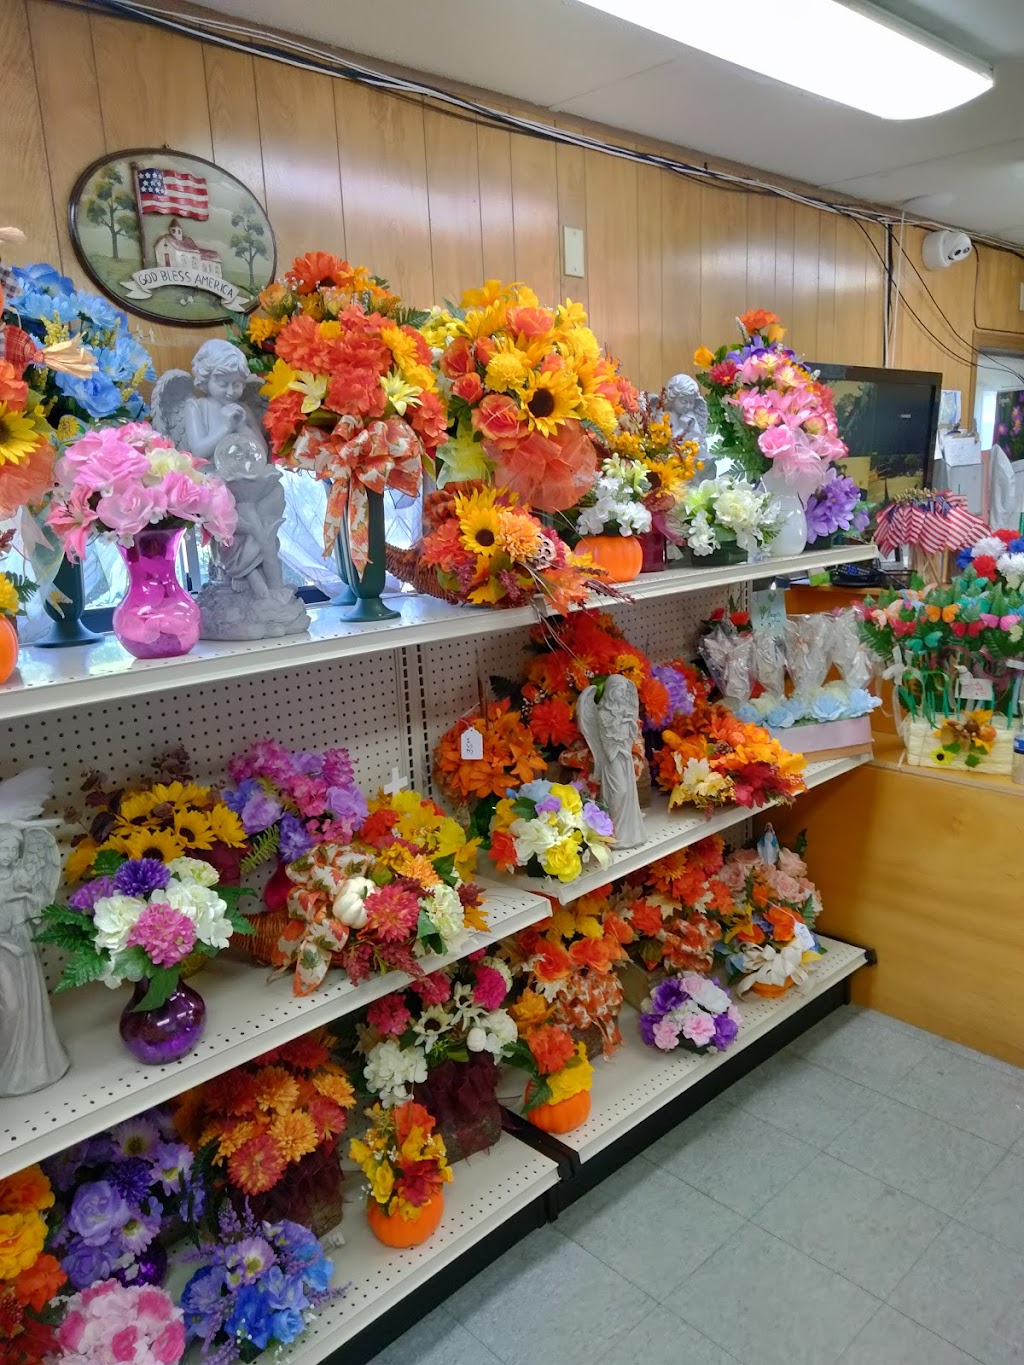 T and N Country Gardens Inc | 341 Sharrott Ave, Staten Island, NY 10309 | Phone: (347) 466-5834